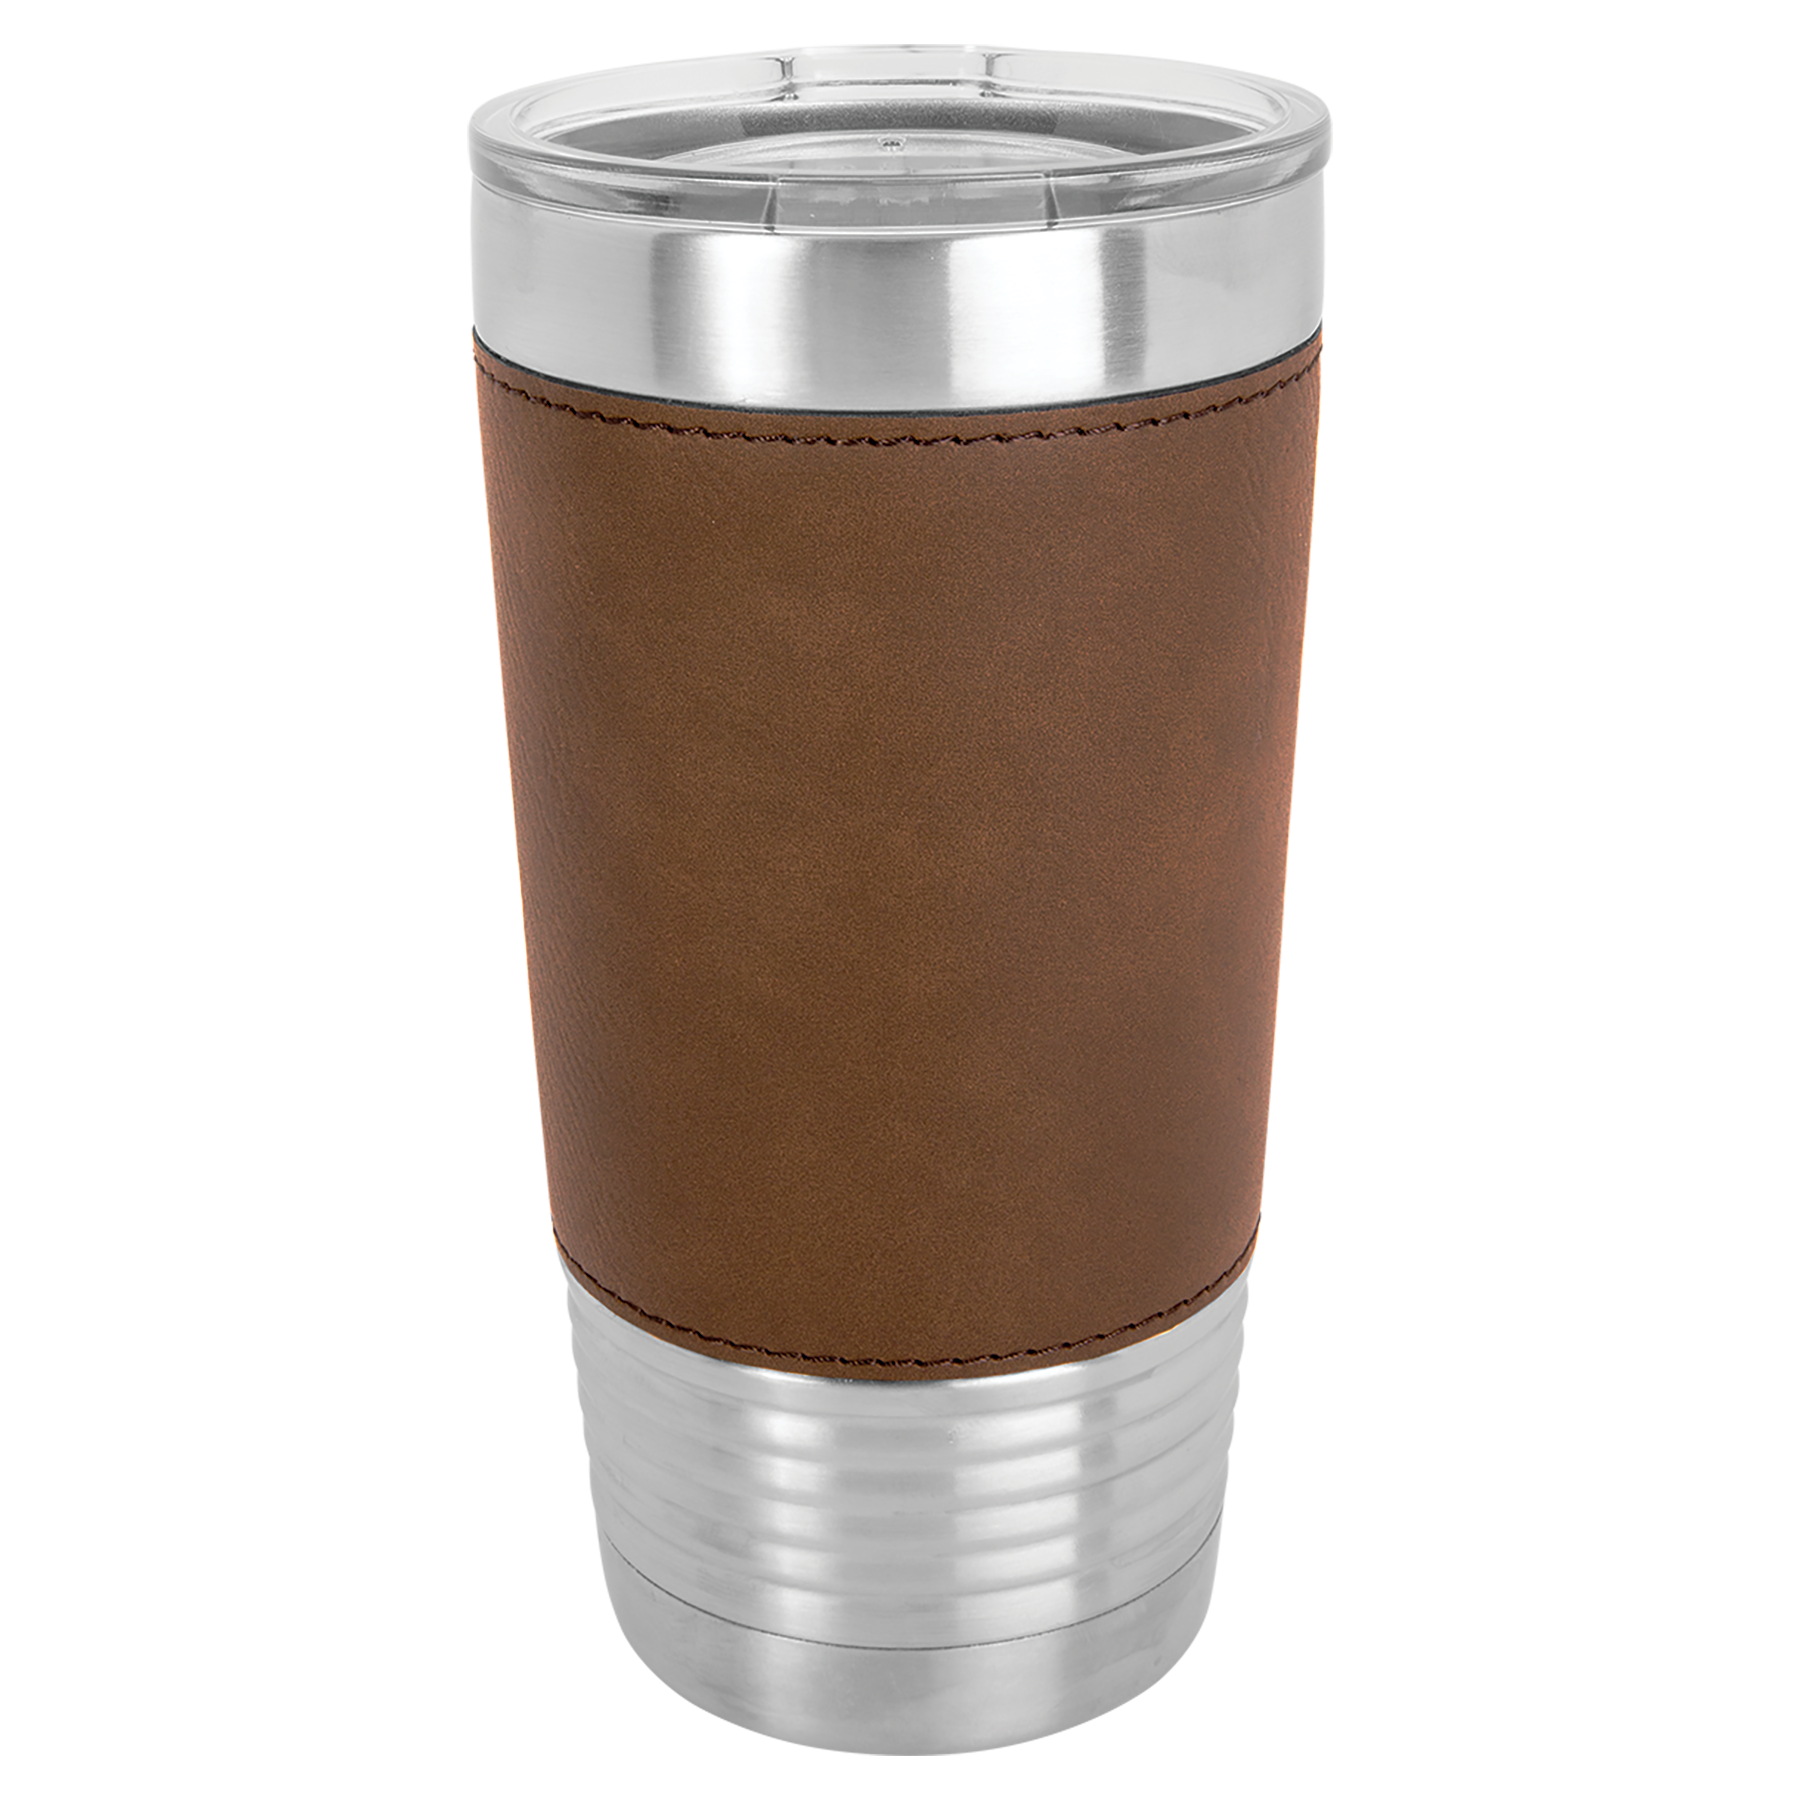 Dark Brown Leatherette Engraves to Black 20oz Tumbler-One Free Engraving -Double-wall Vacuum Insulated -Made from 18/8 Gauge Stainless Steel (Type 304 Food Grade) -Lid is BPA Free (Hand Wash Only) -Not recommended for Dishwasher -Leatherette Not Removable -Works with Cold and Hot Drinks -10 Color Options -Perfect for Personalized Gifts, Awards, Incentives, Swag & Fundraisers